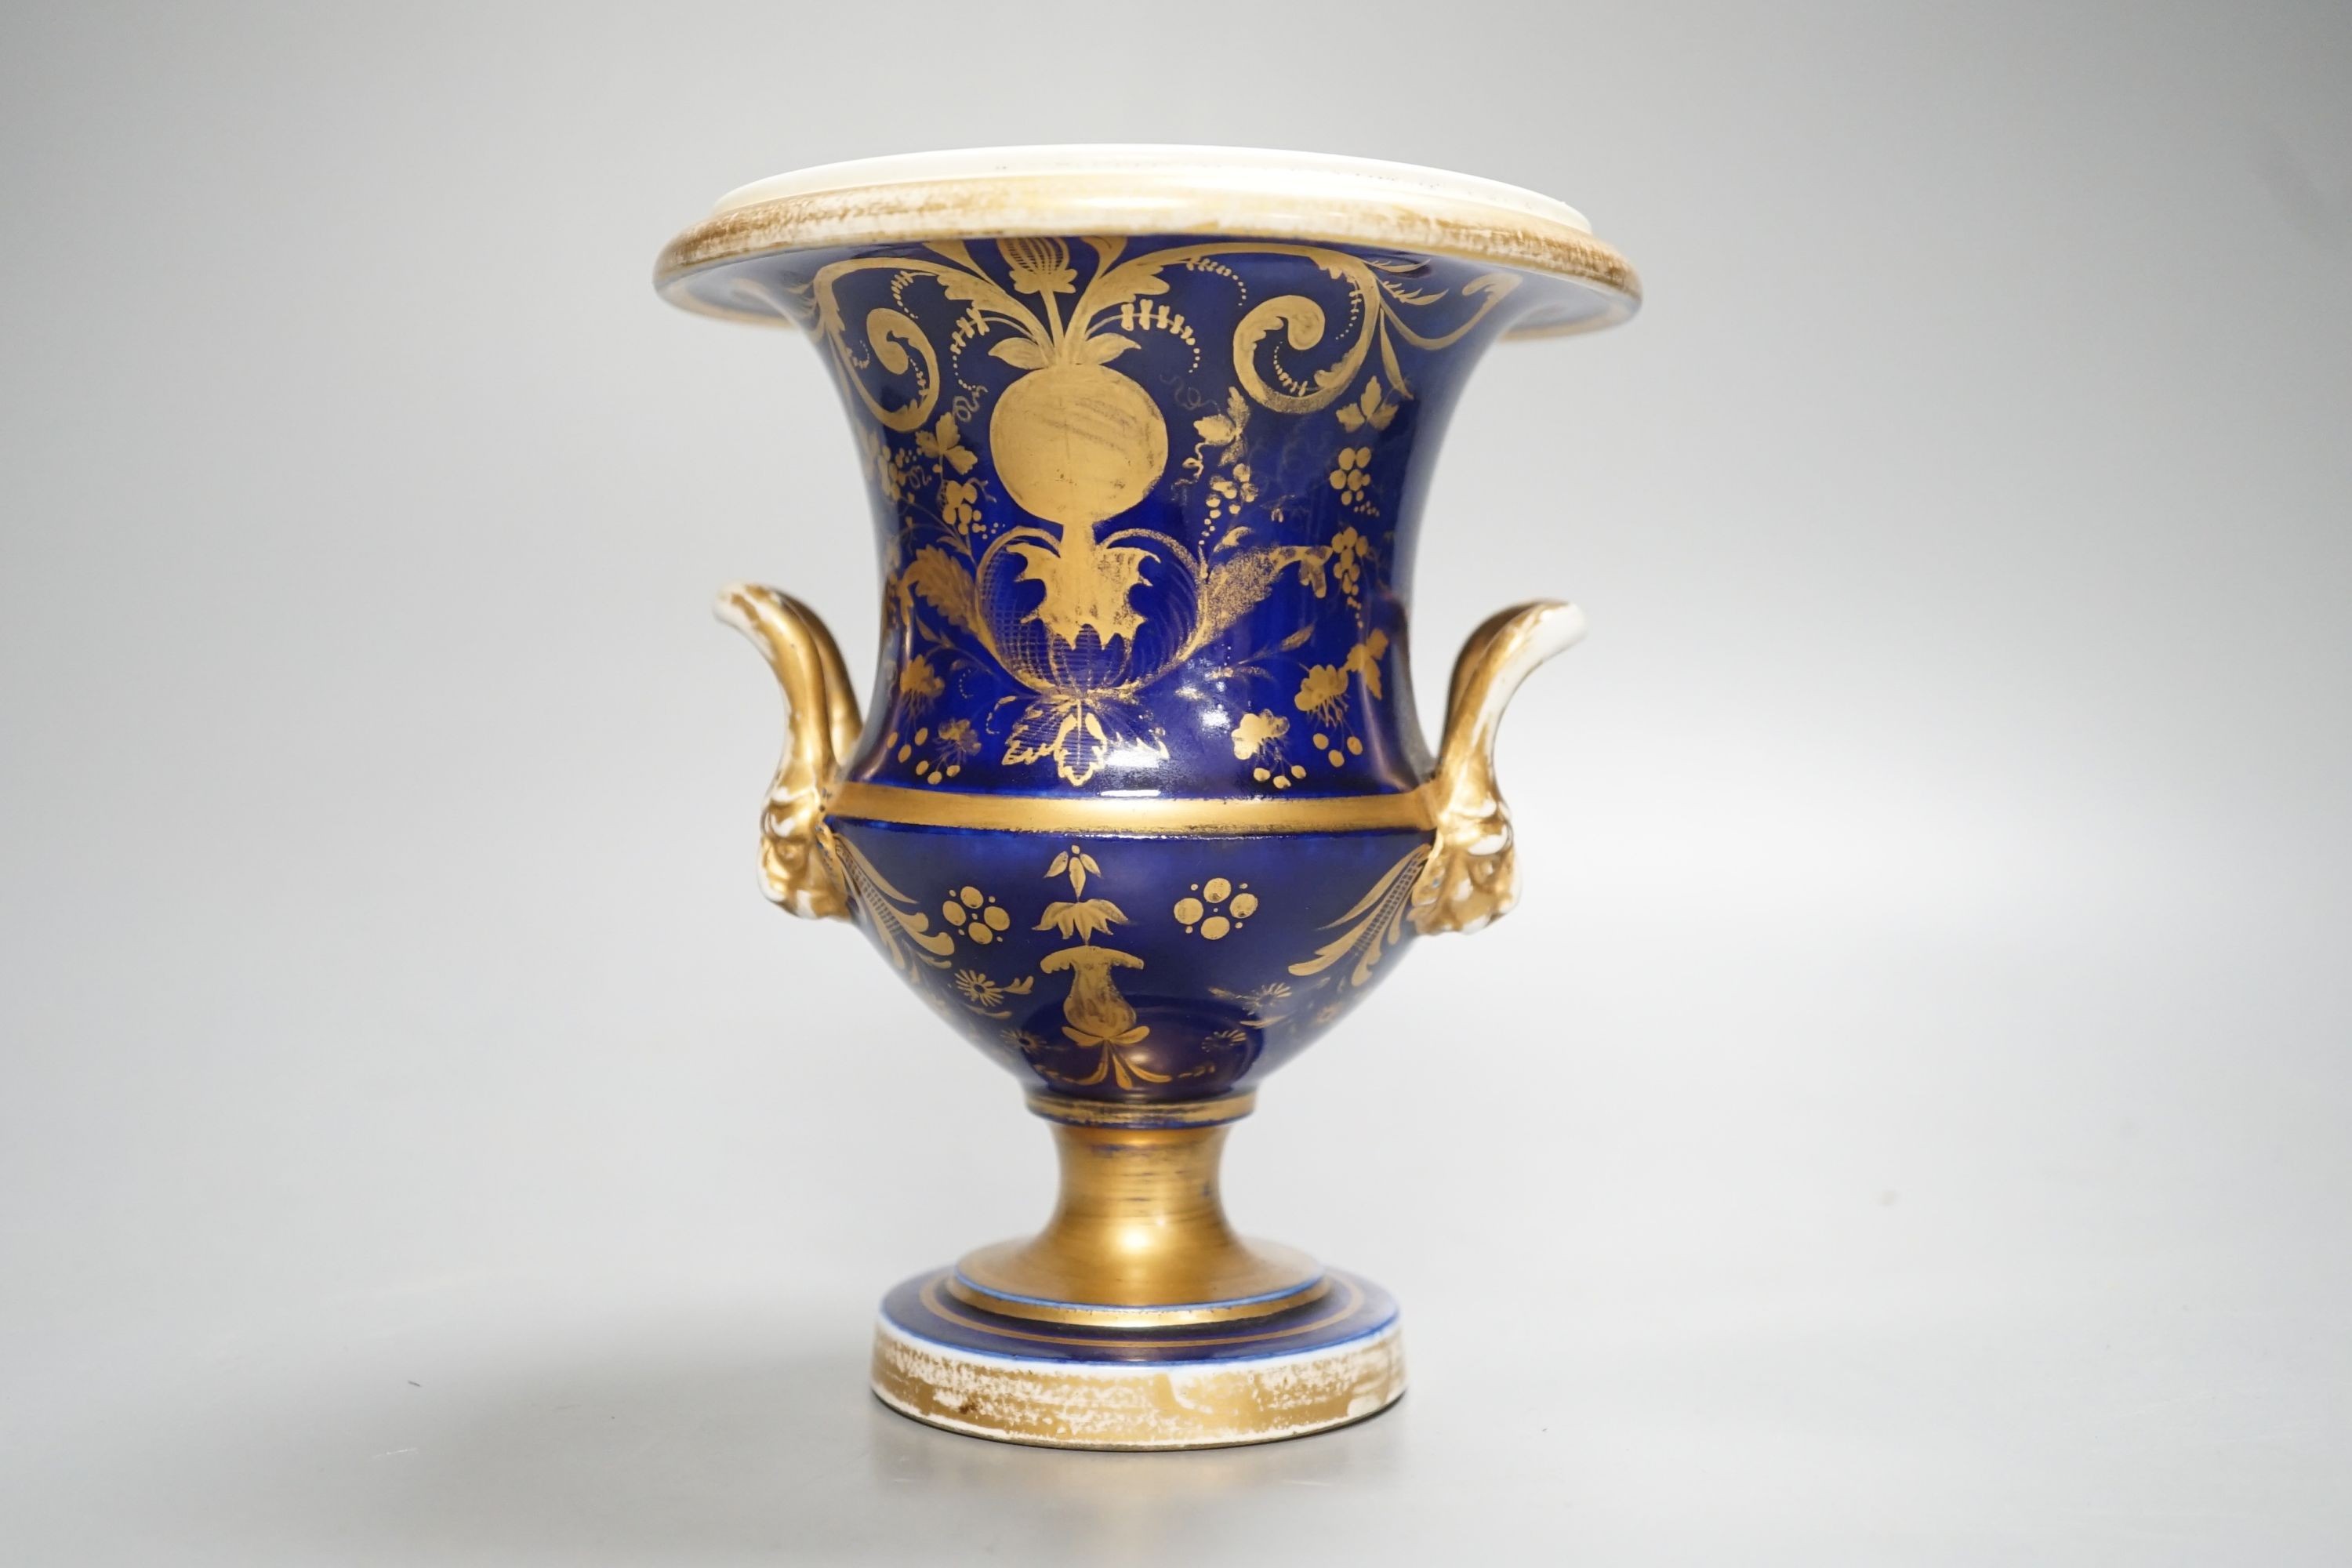 A Herculaneum two handled pedestal campana shaped vase, painted with basket of flowers, within a shaped cartouche on a cobalt blue and gilt ground, c.1815, height 14.5cm